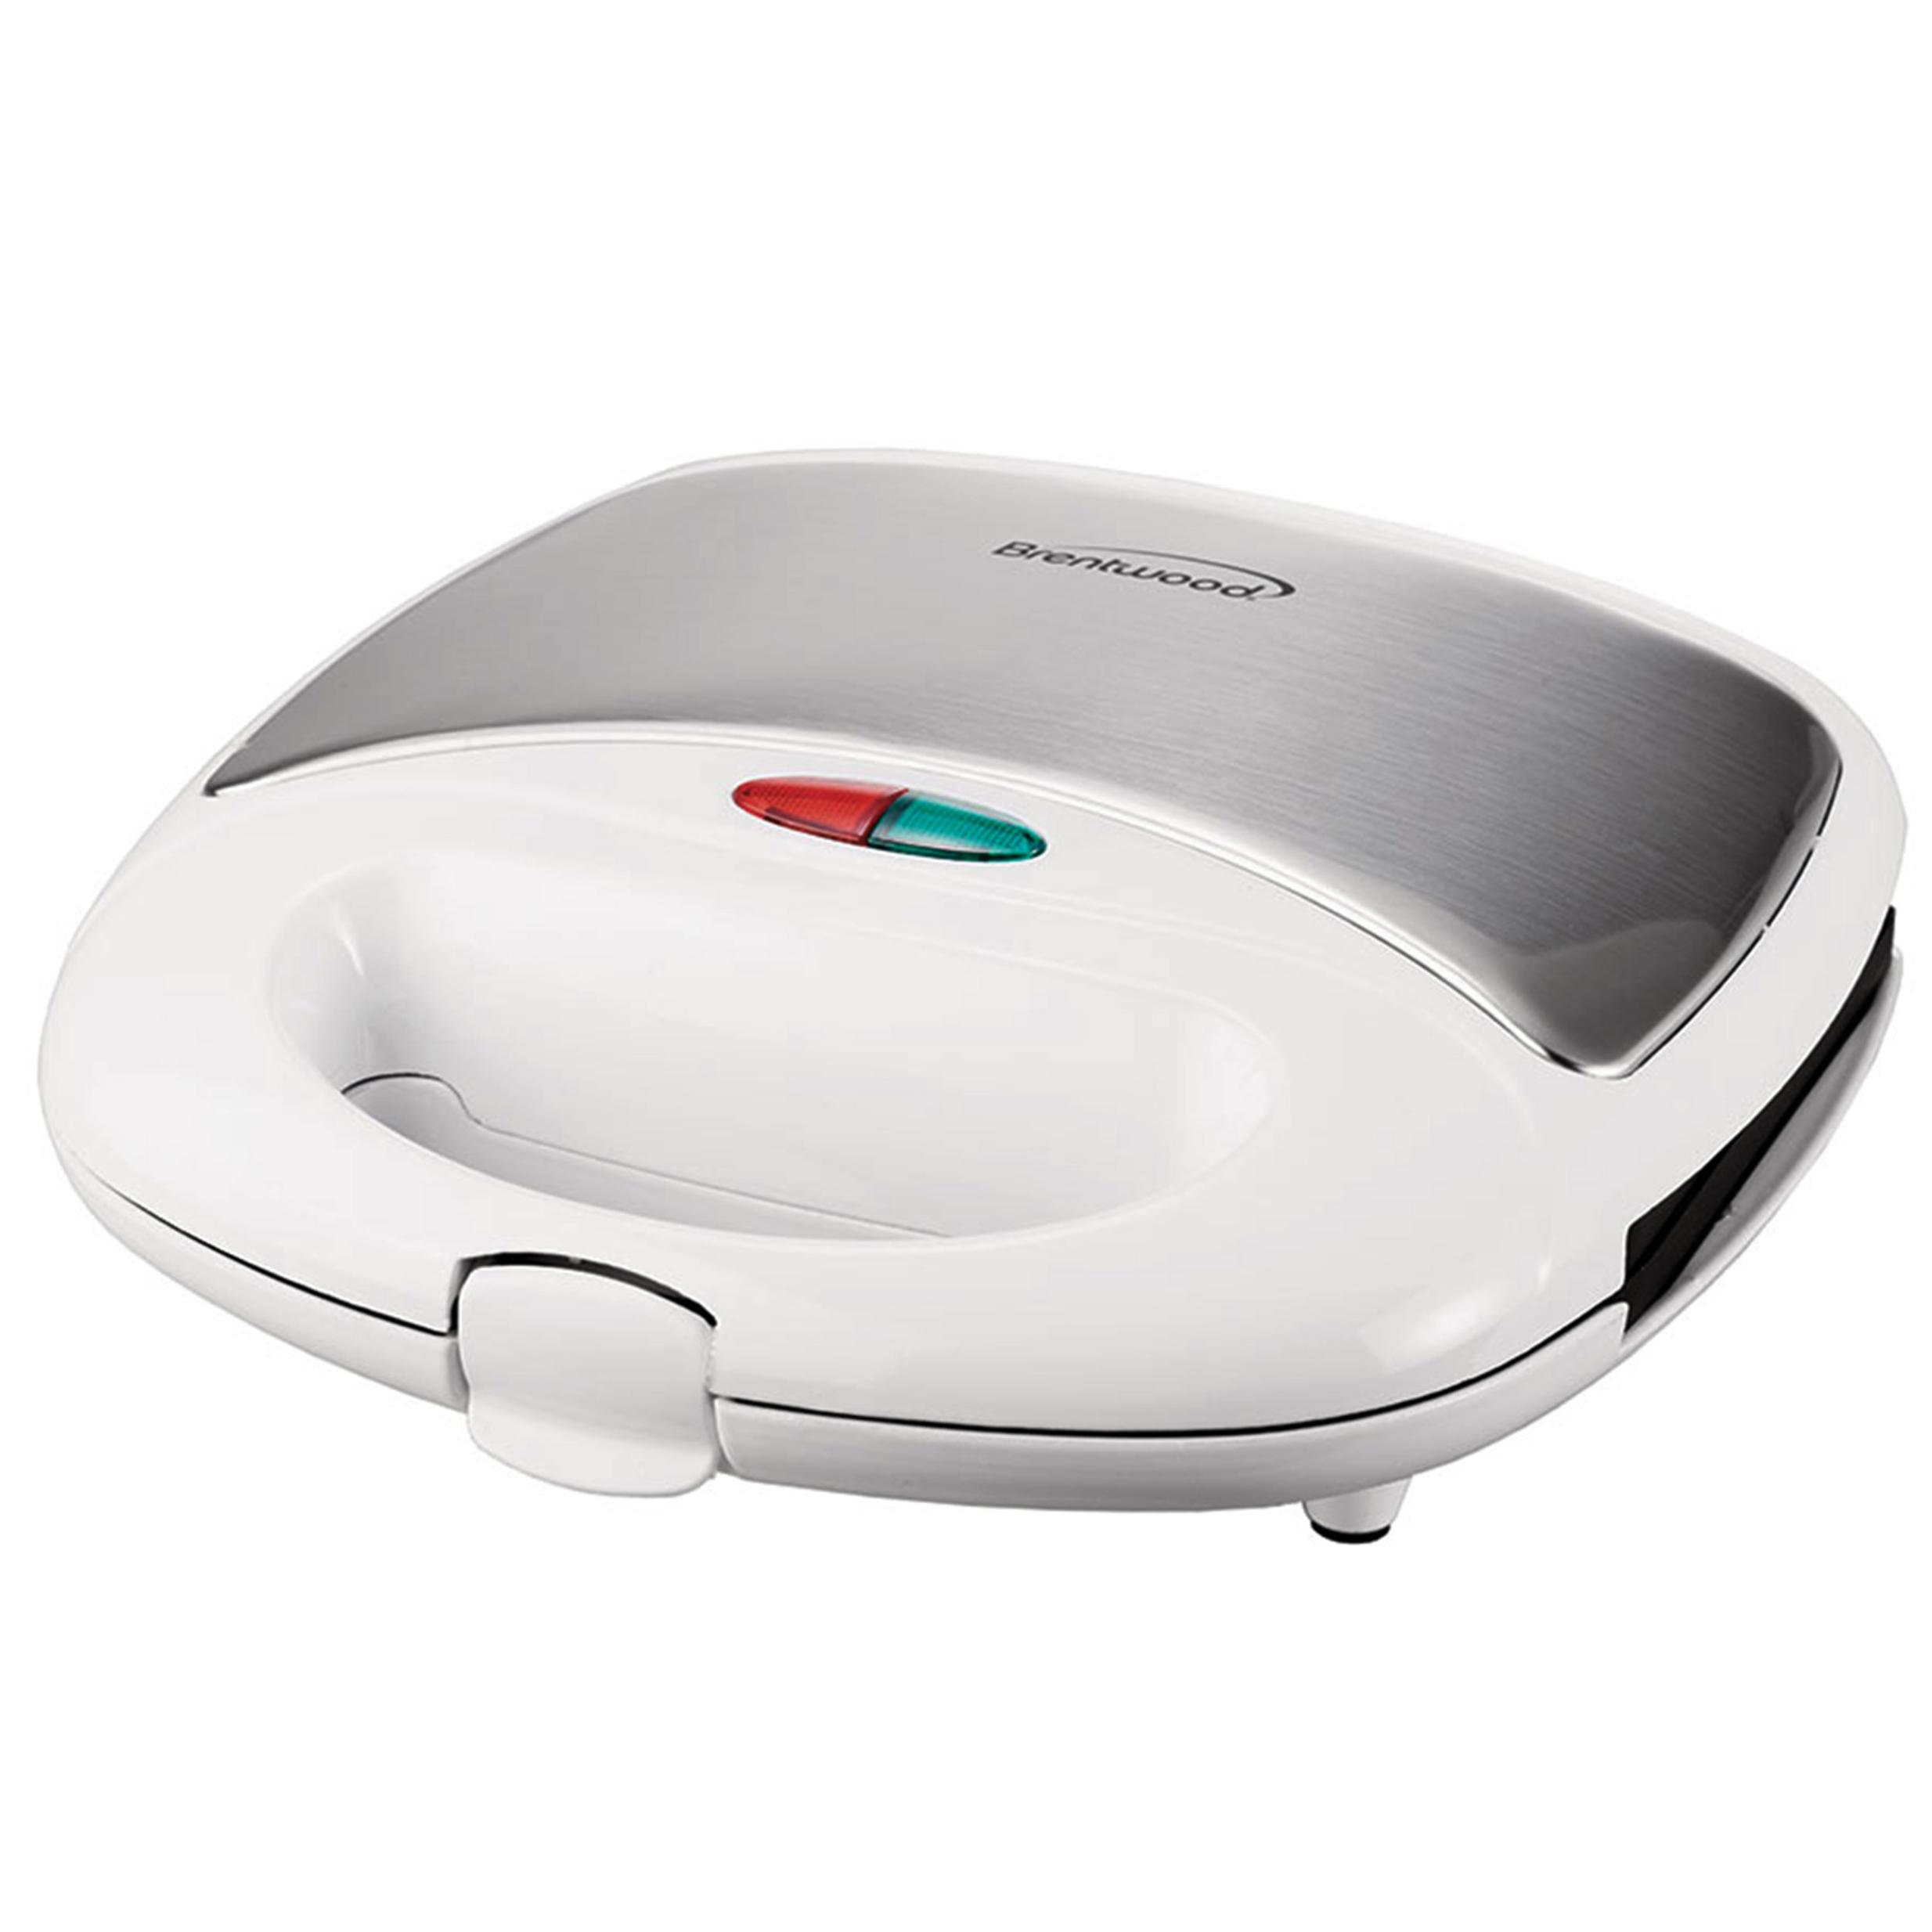 Brentwood Appliances TS-240W Nonstick Compact Dual Sandwich Maker (White) - image 1 of 3